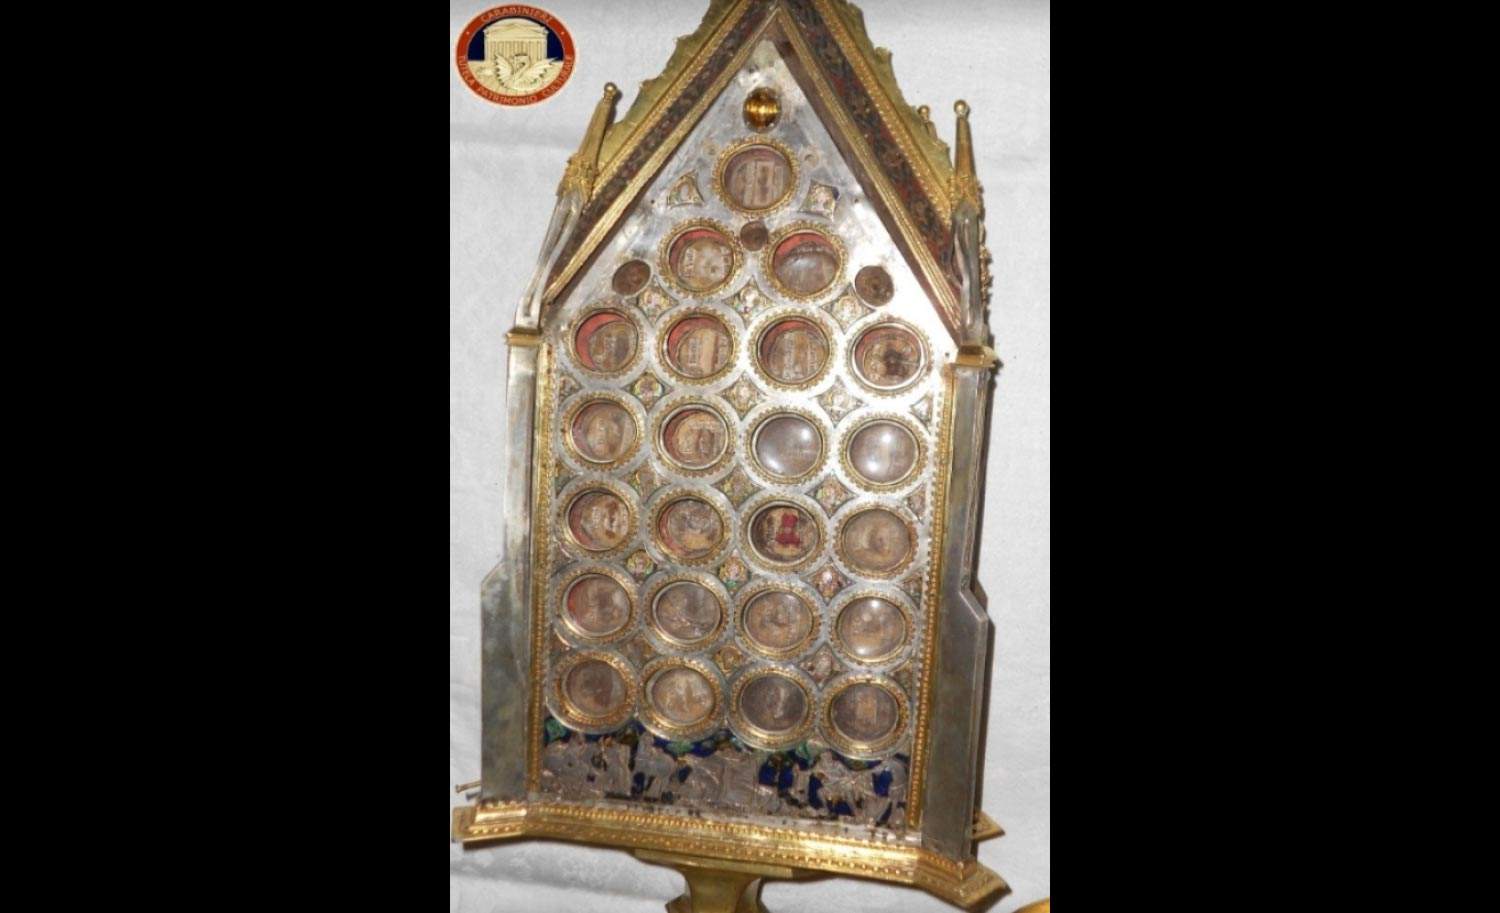 Reliquary of St. Galgano returned to Siena today: it had been stolen in 1989